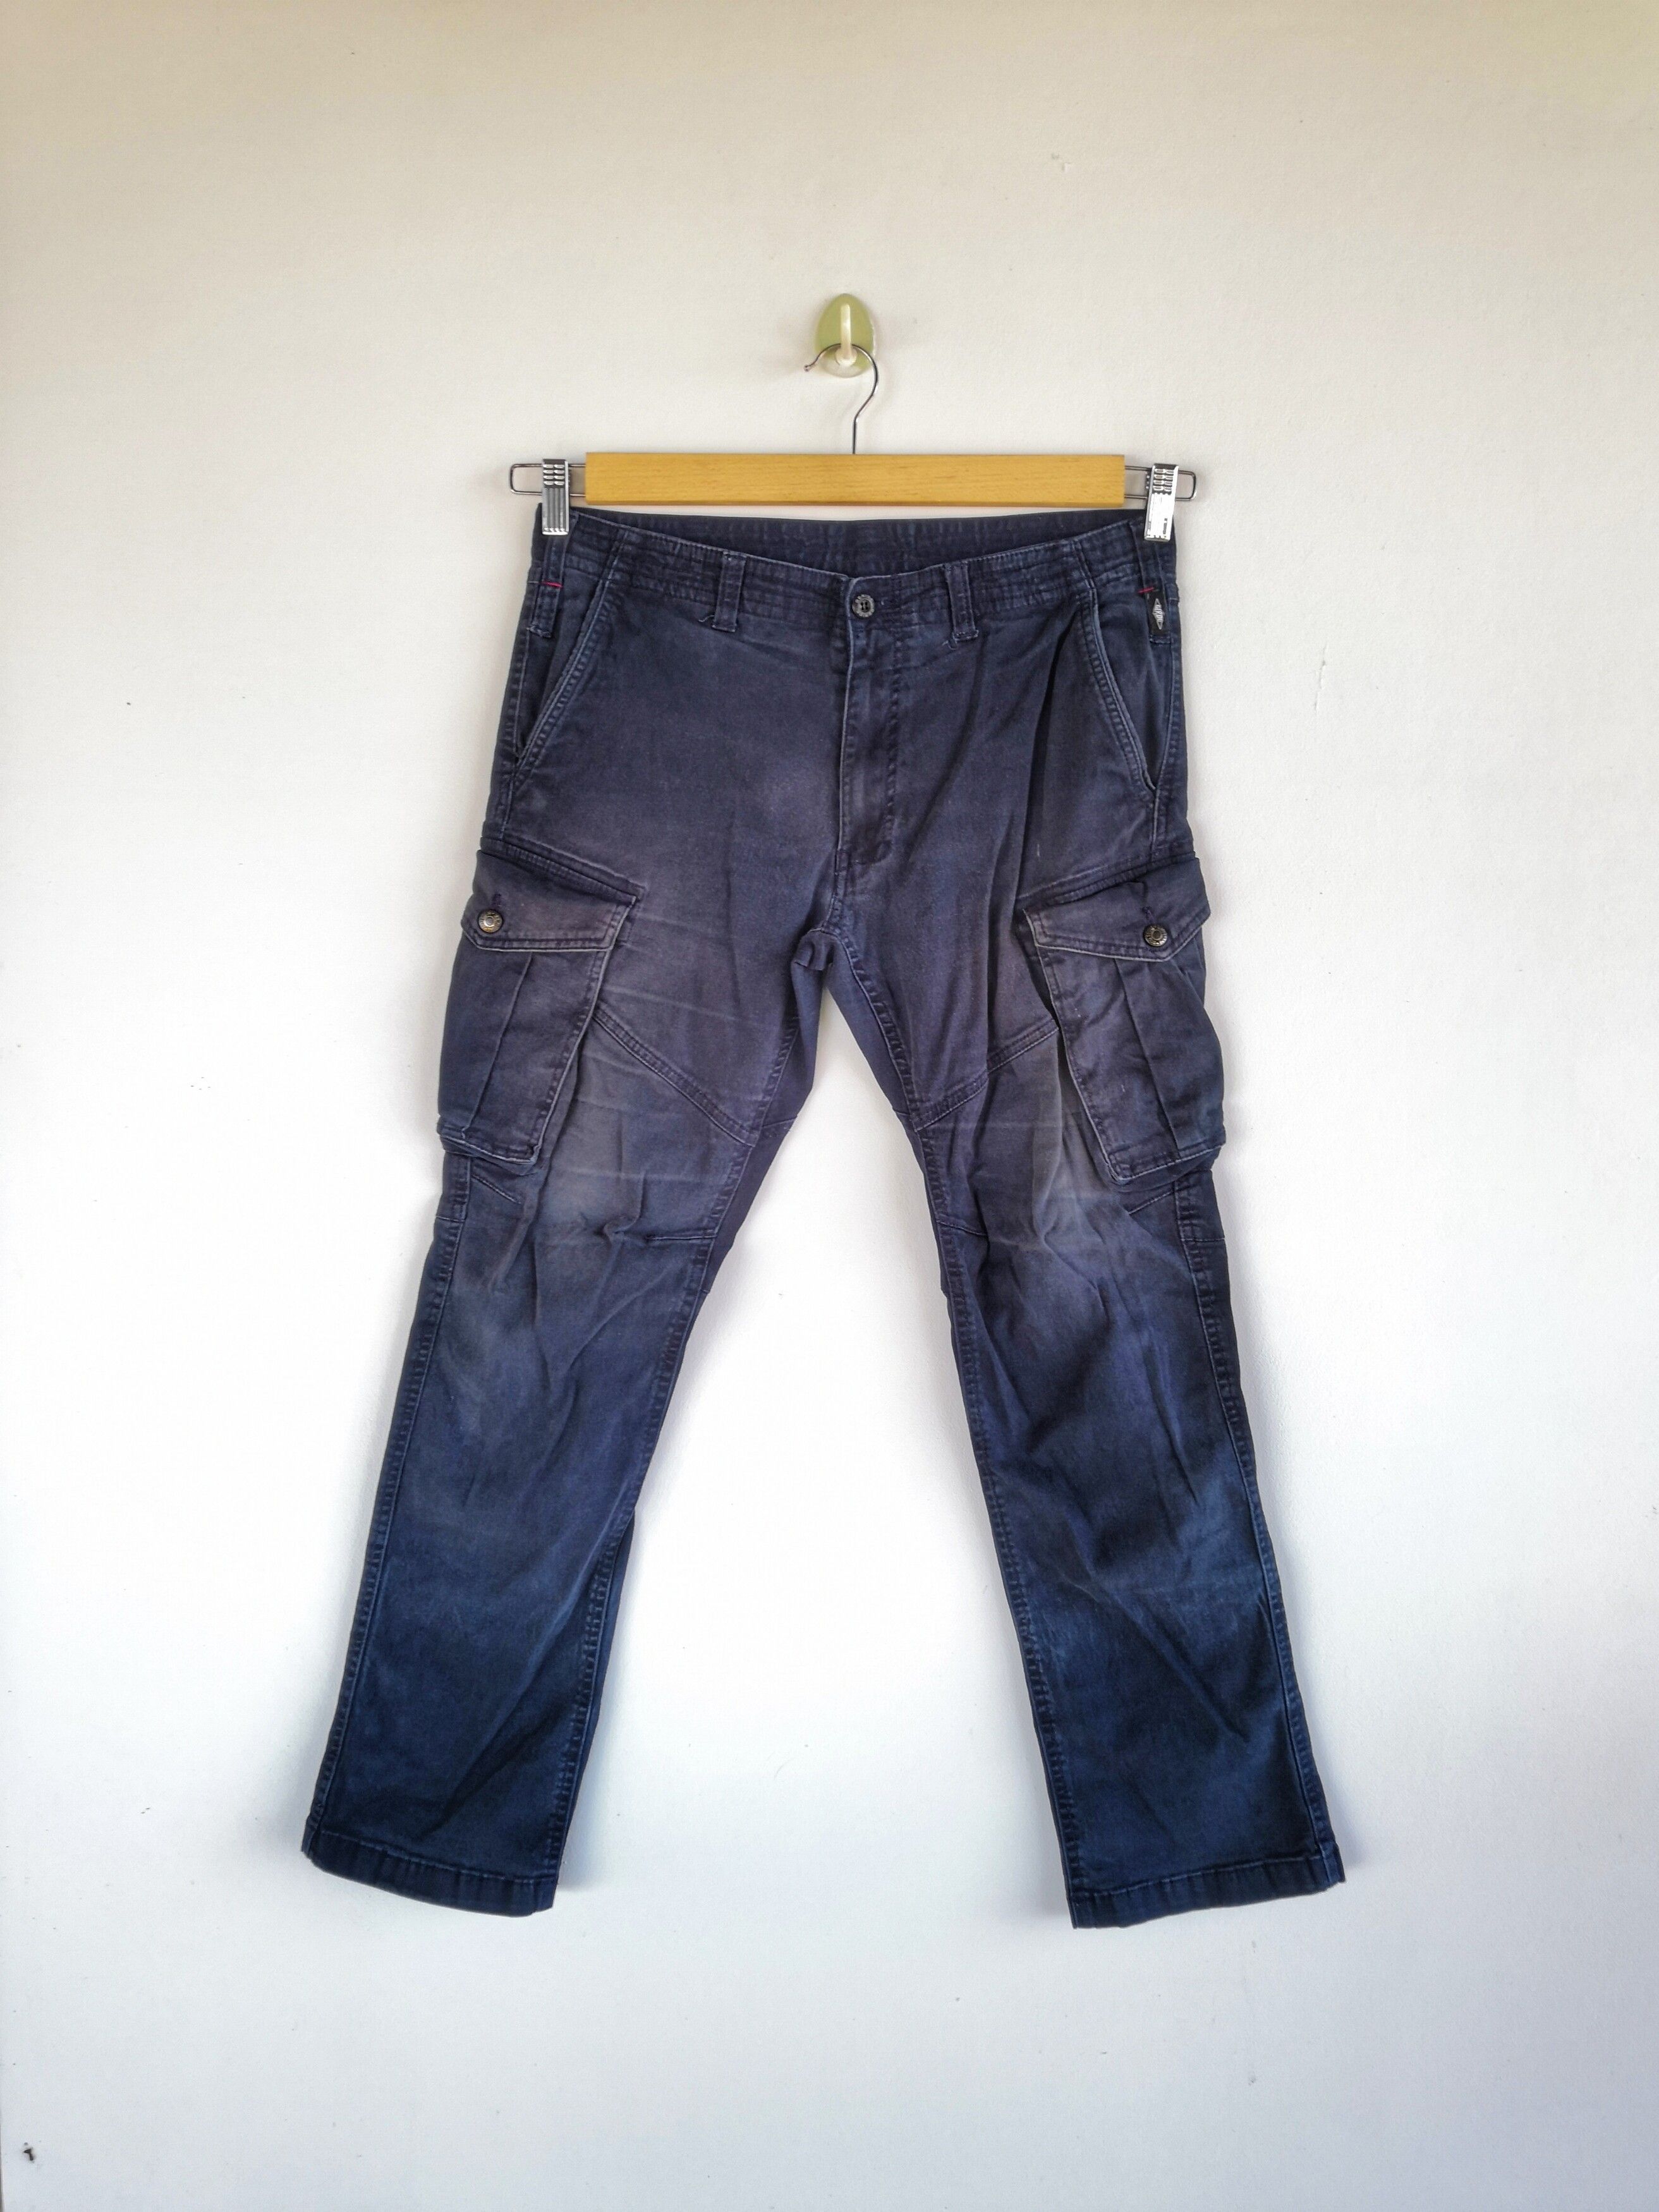 Vintage Japanese Cargo Pants Multipocket Fatigue Cargo Trousers | Grailed